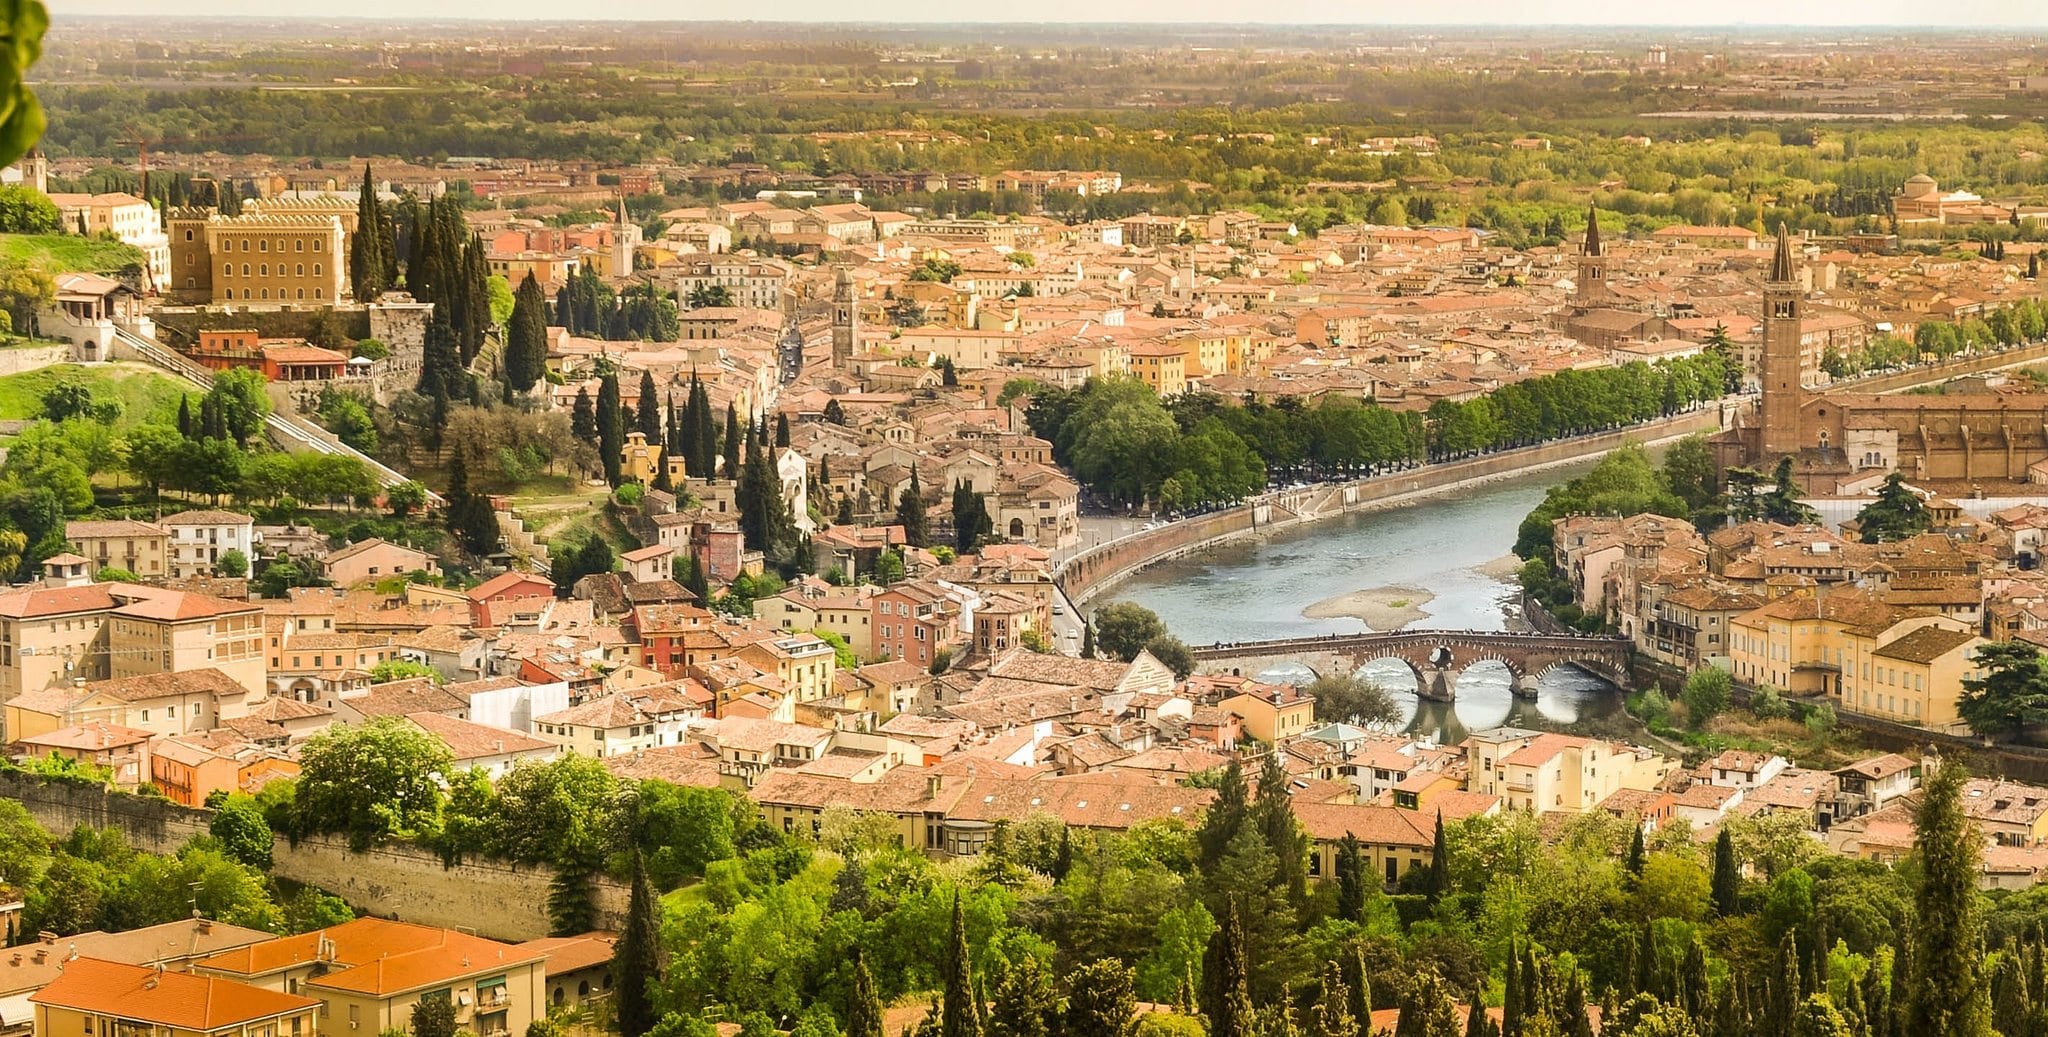 Aerial view of Verona Italy, showing the buildings, canal, and bridge